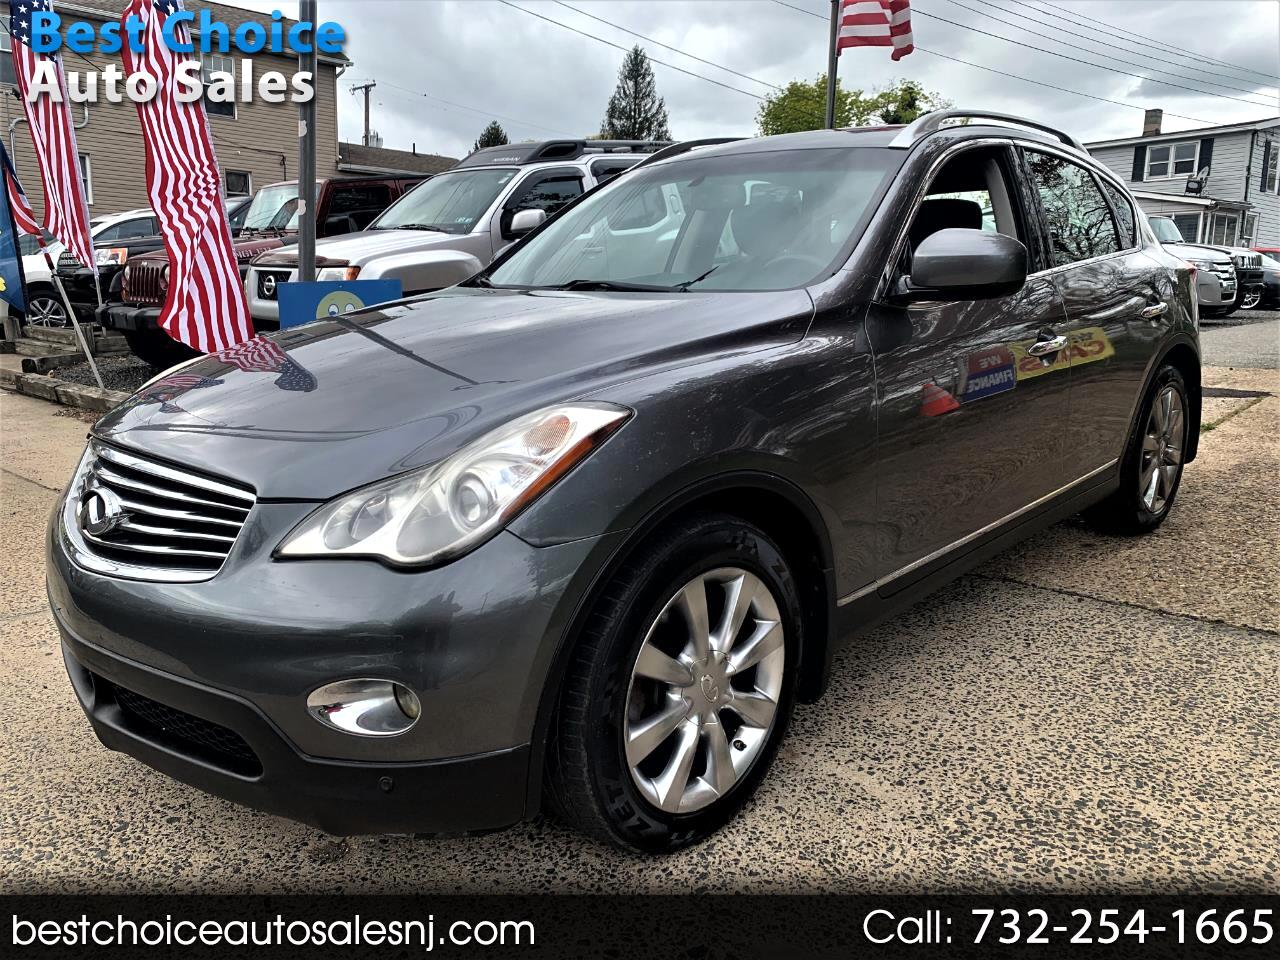 Used 2012 Infiniti EX35 AWD 4dr Journey for Sale in Sayreville NJ 08872  Best Choice Auto Sales